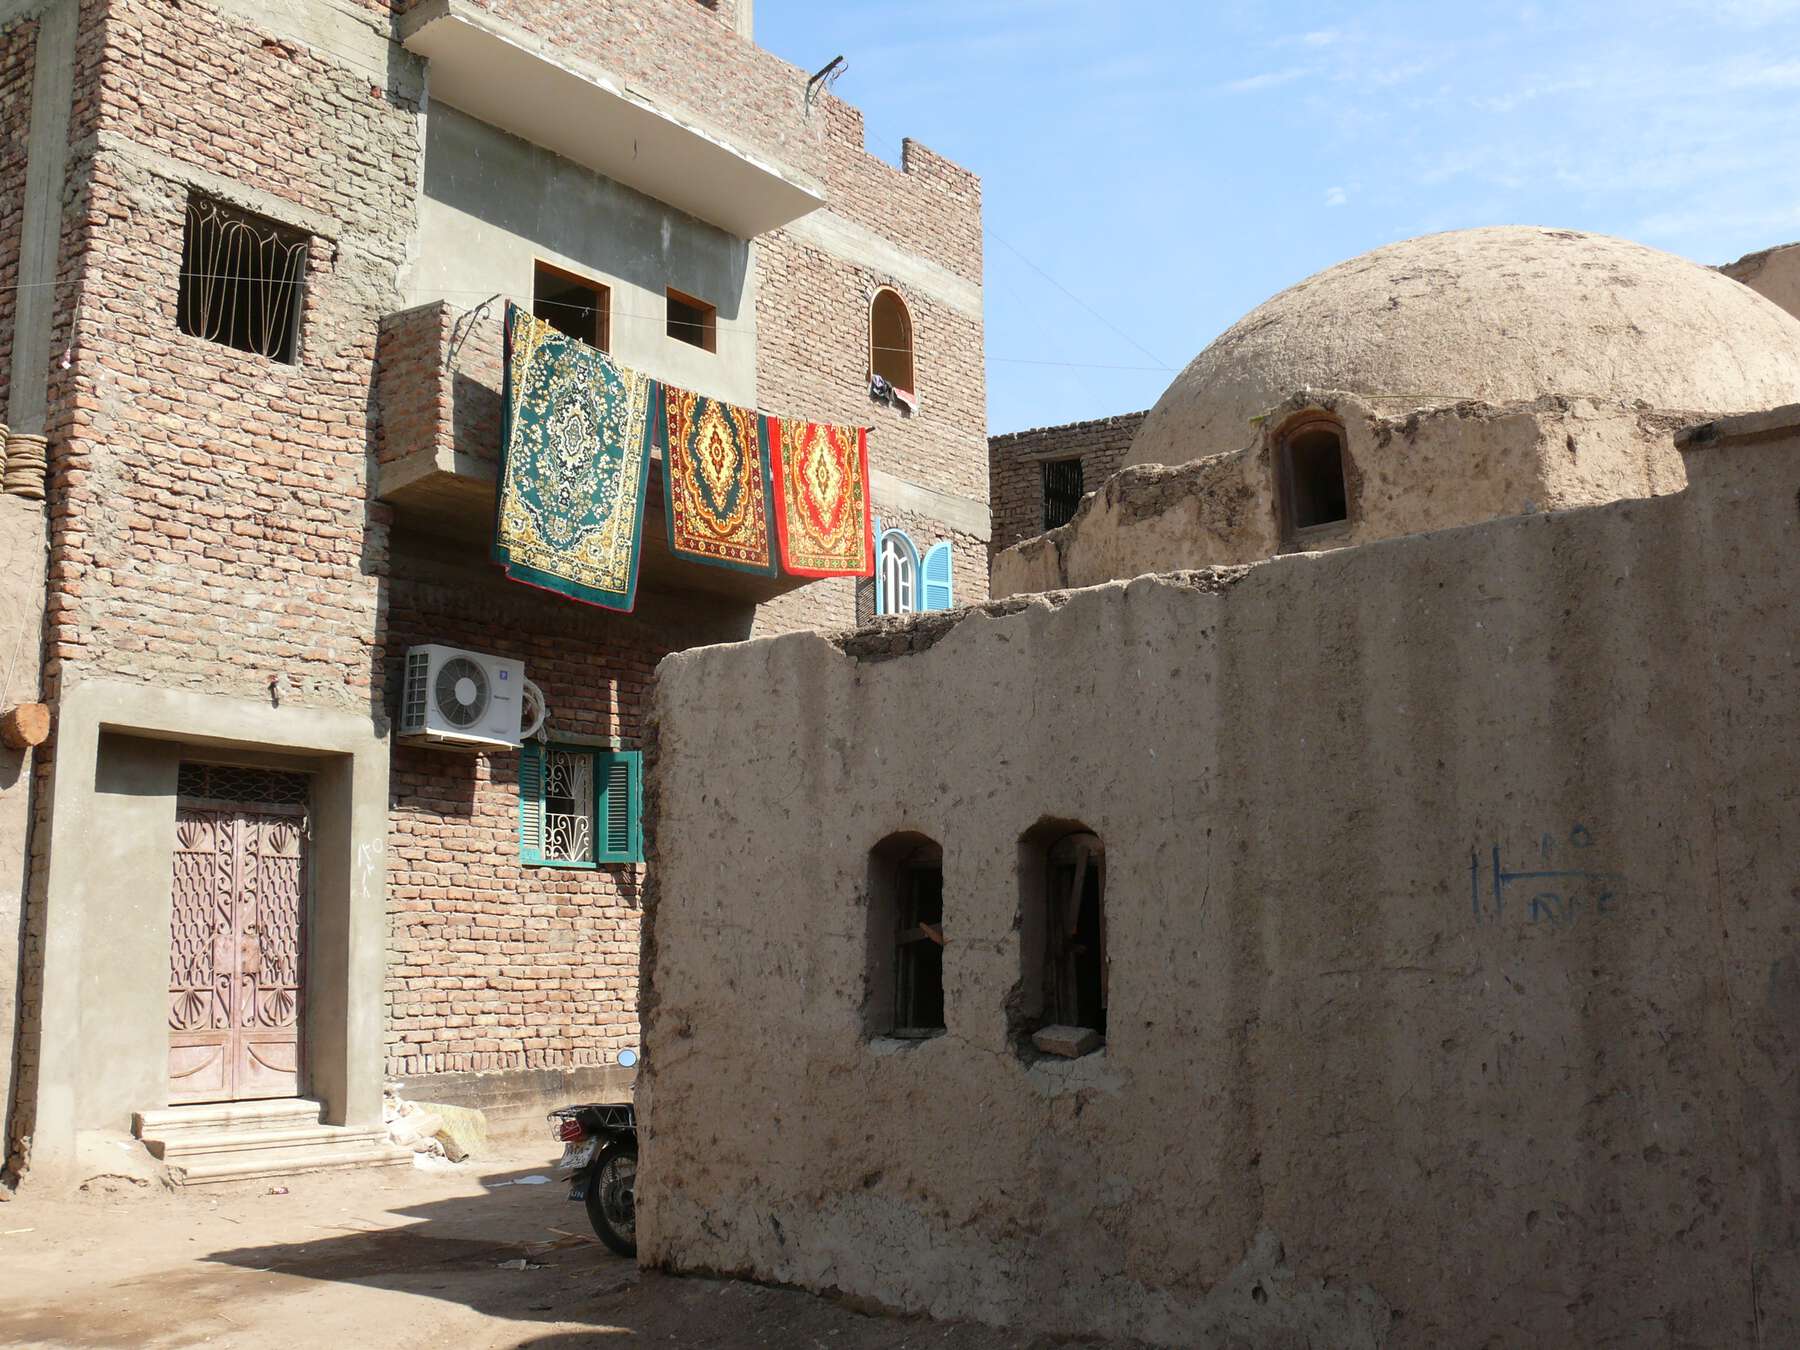 Small building with a dome on the top and behind it, a multistory brick building with three colorful rugs hanging from a balcony.